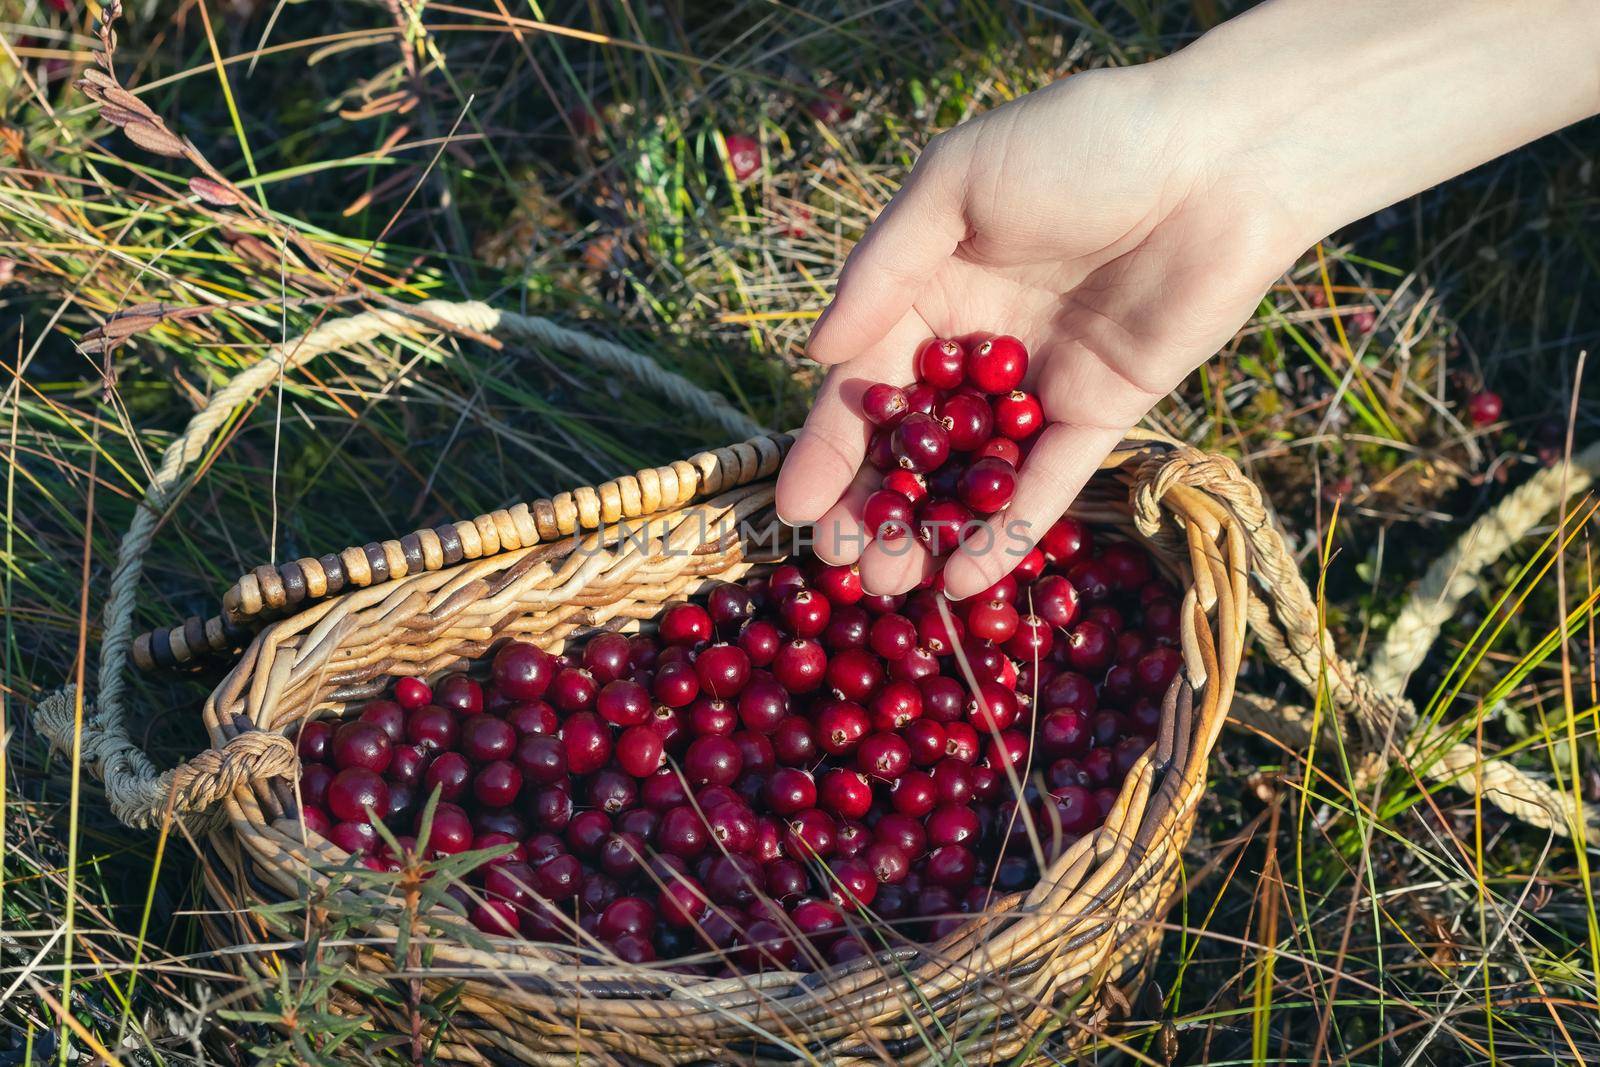 Woman's hand pours the collected cranberries into a basket.